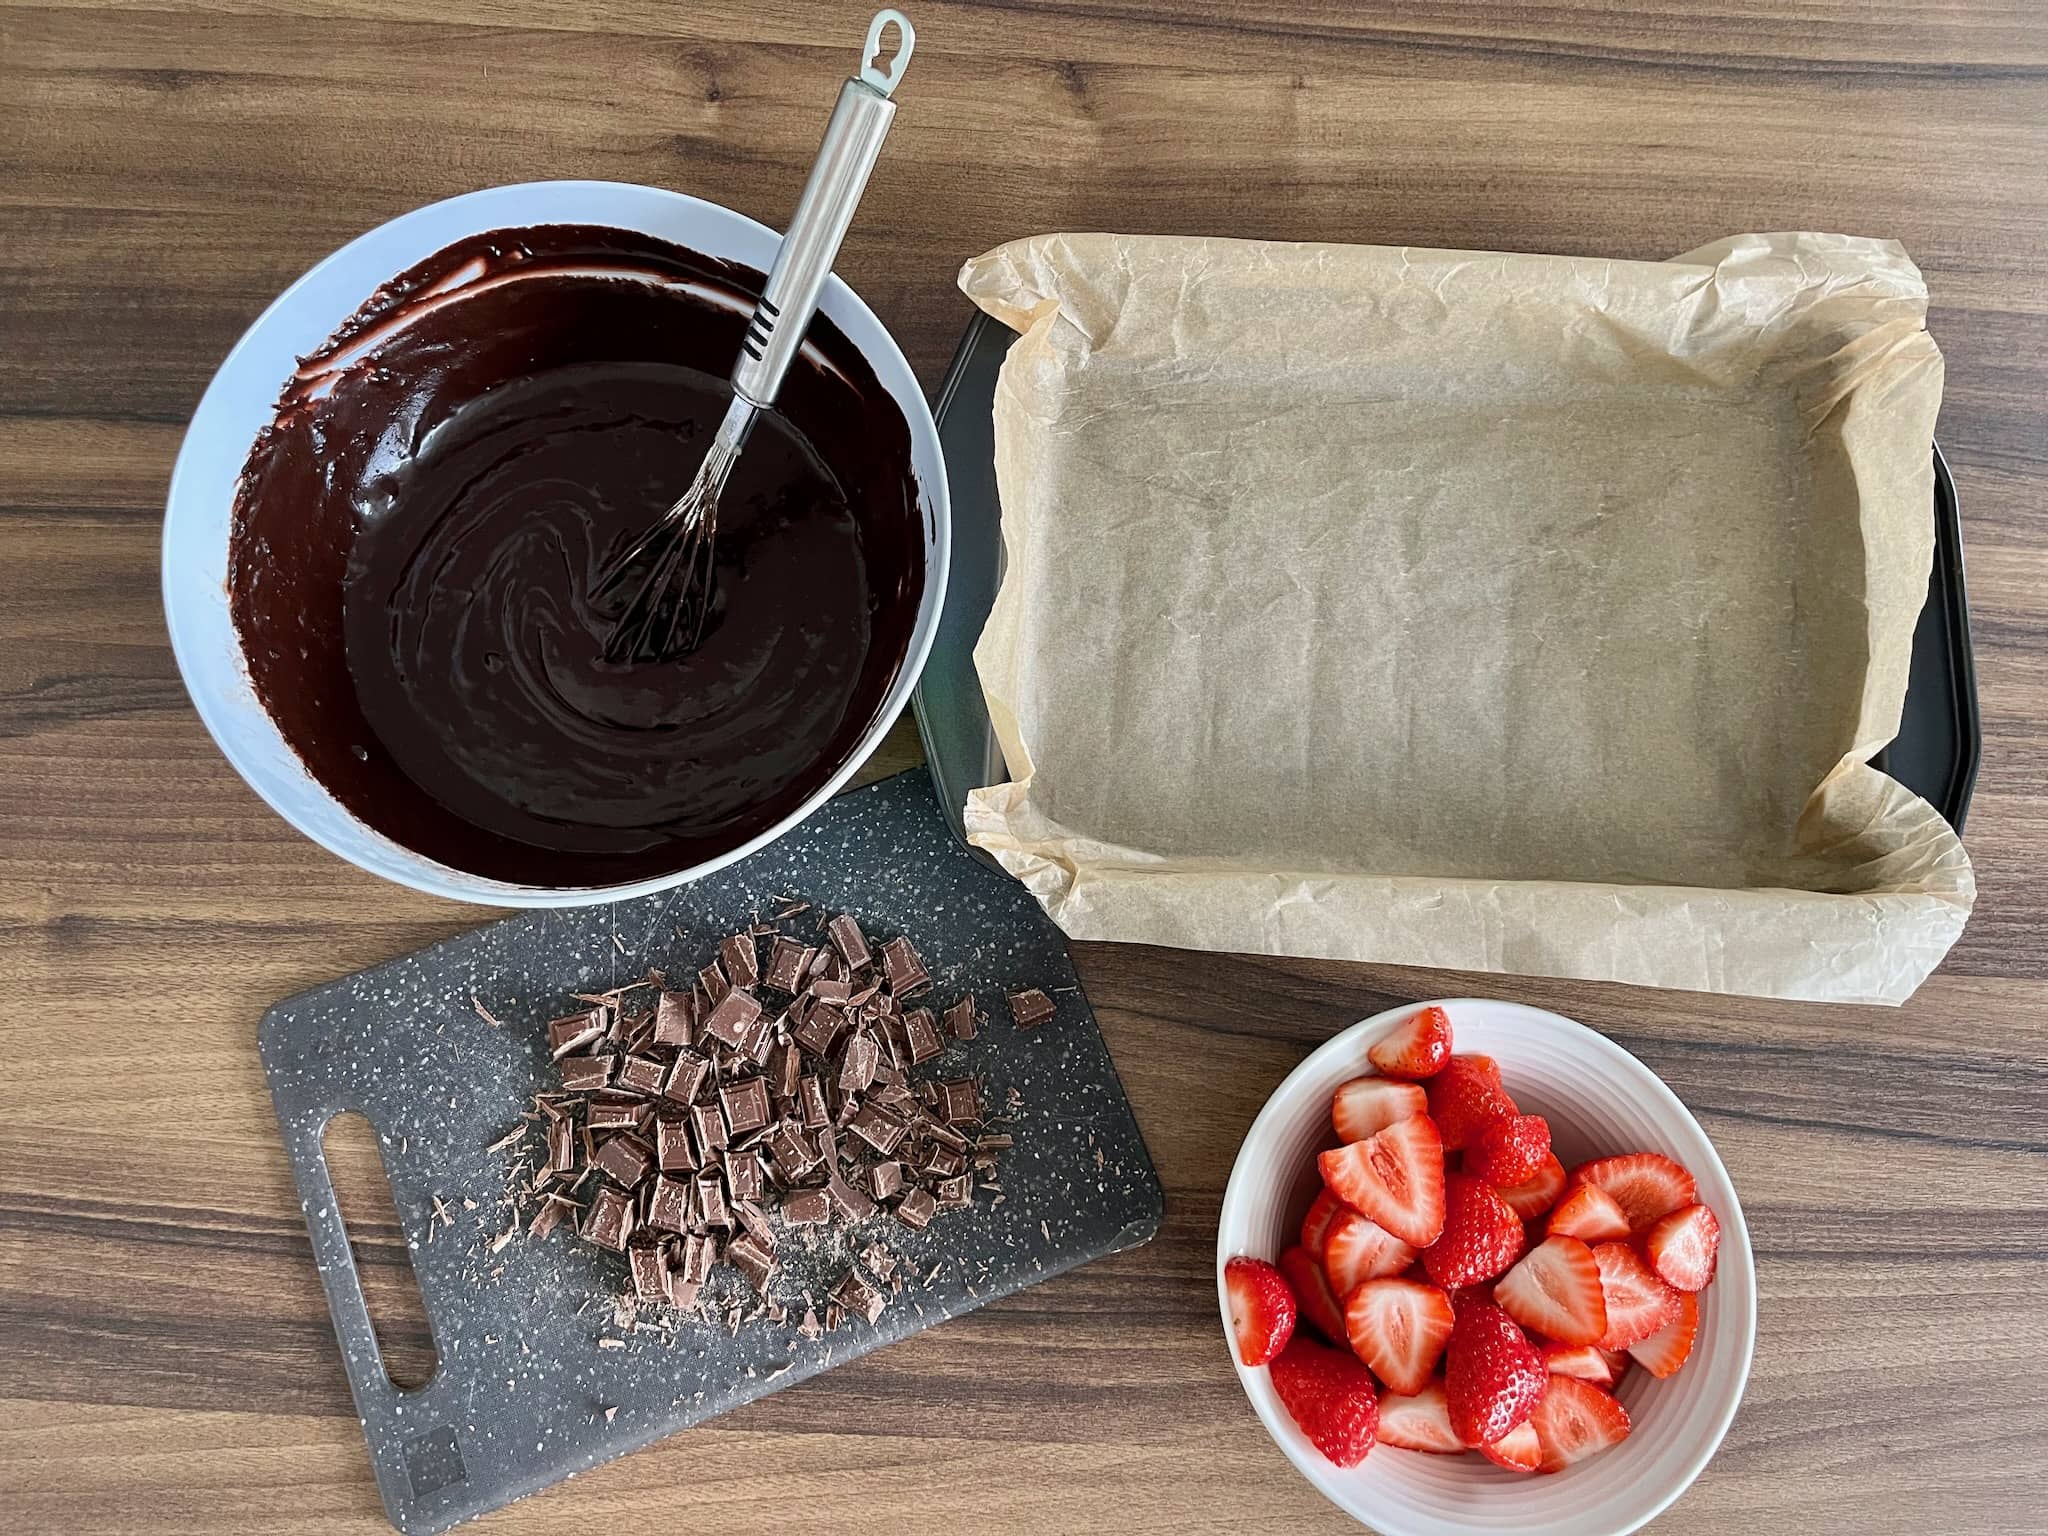 Brownie mix in a bowl, chocolate chopped, baking tray lined and strawberry halved